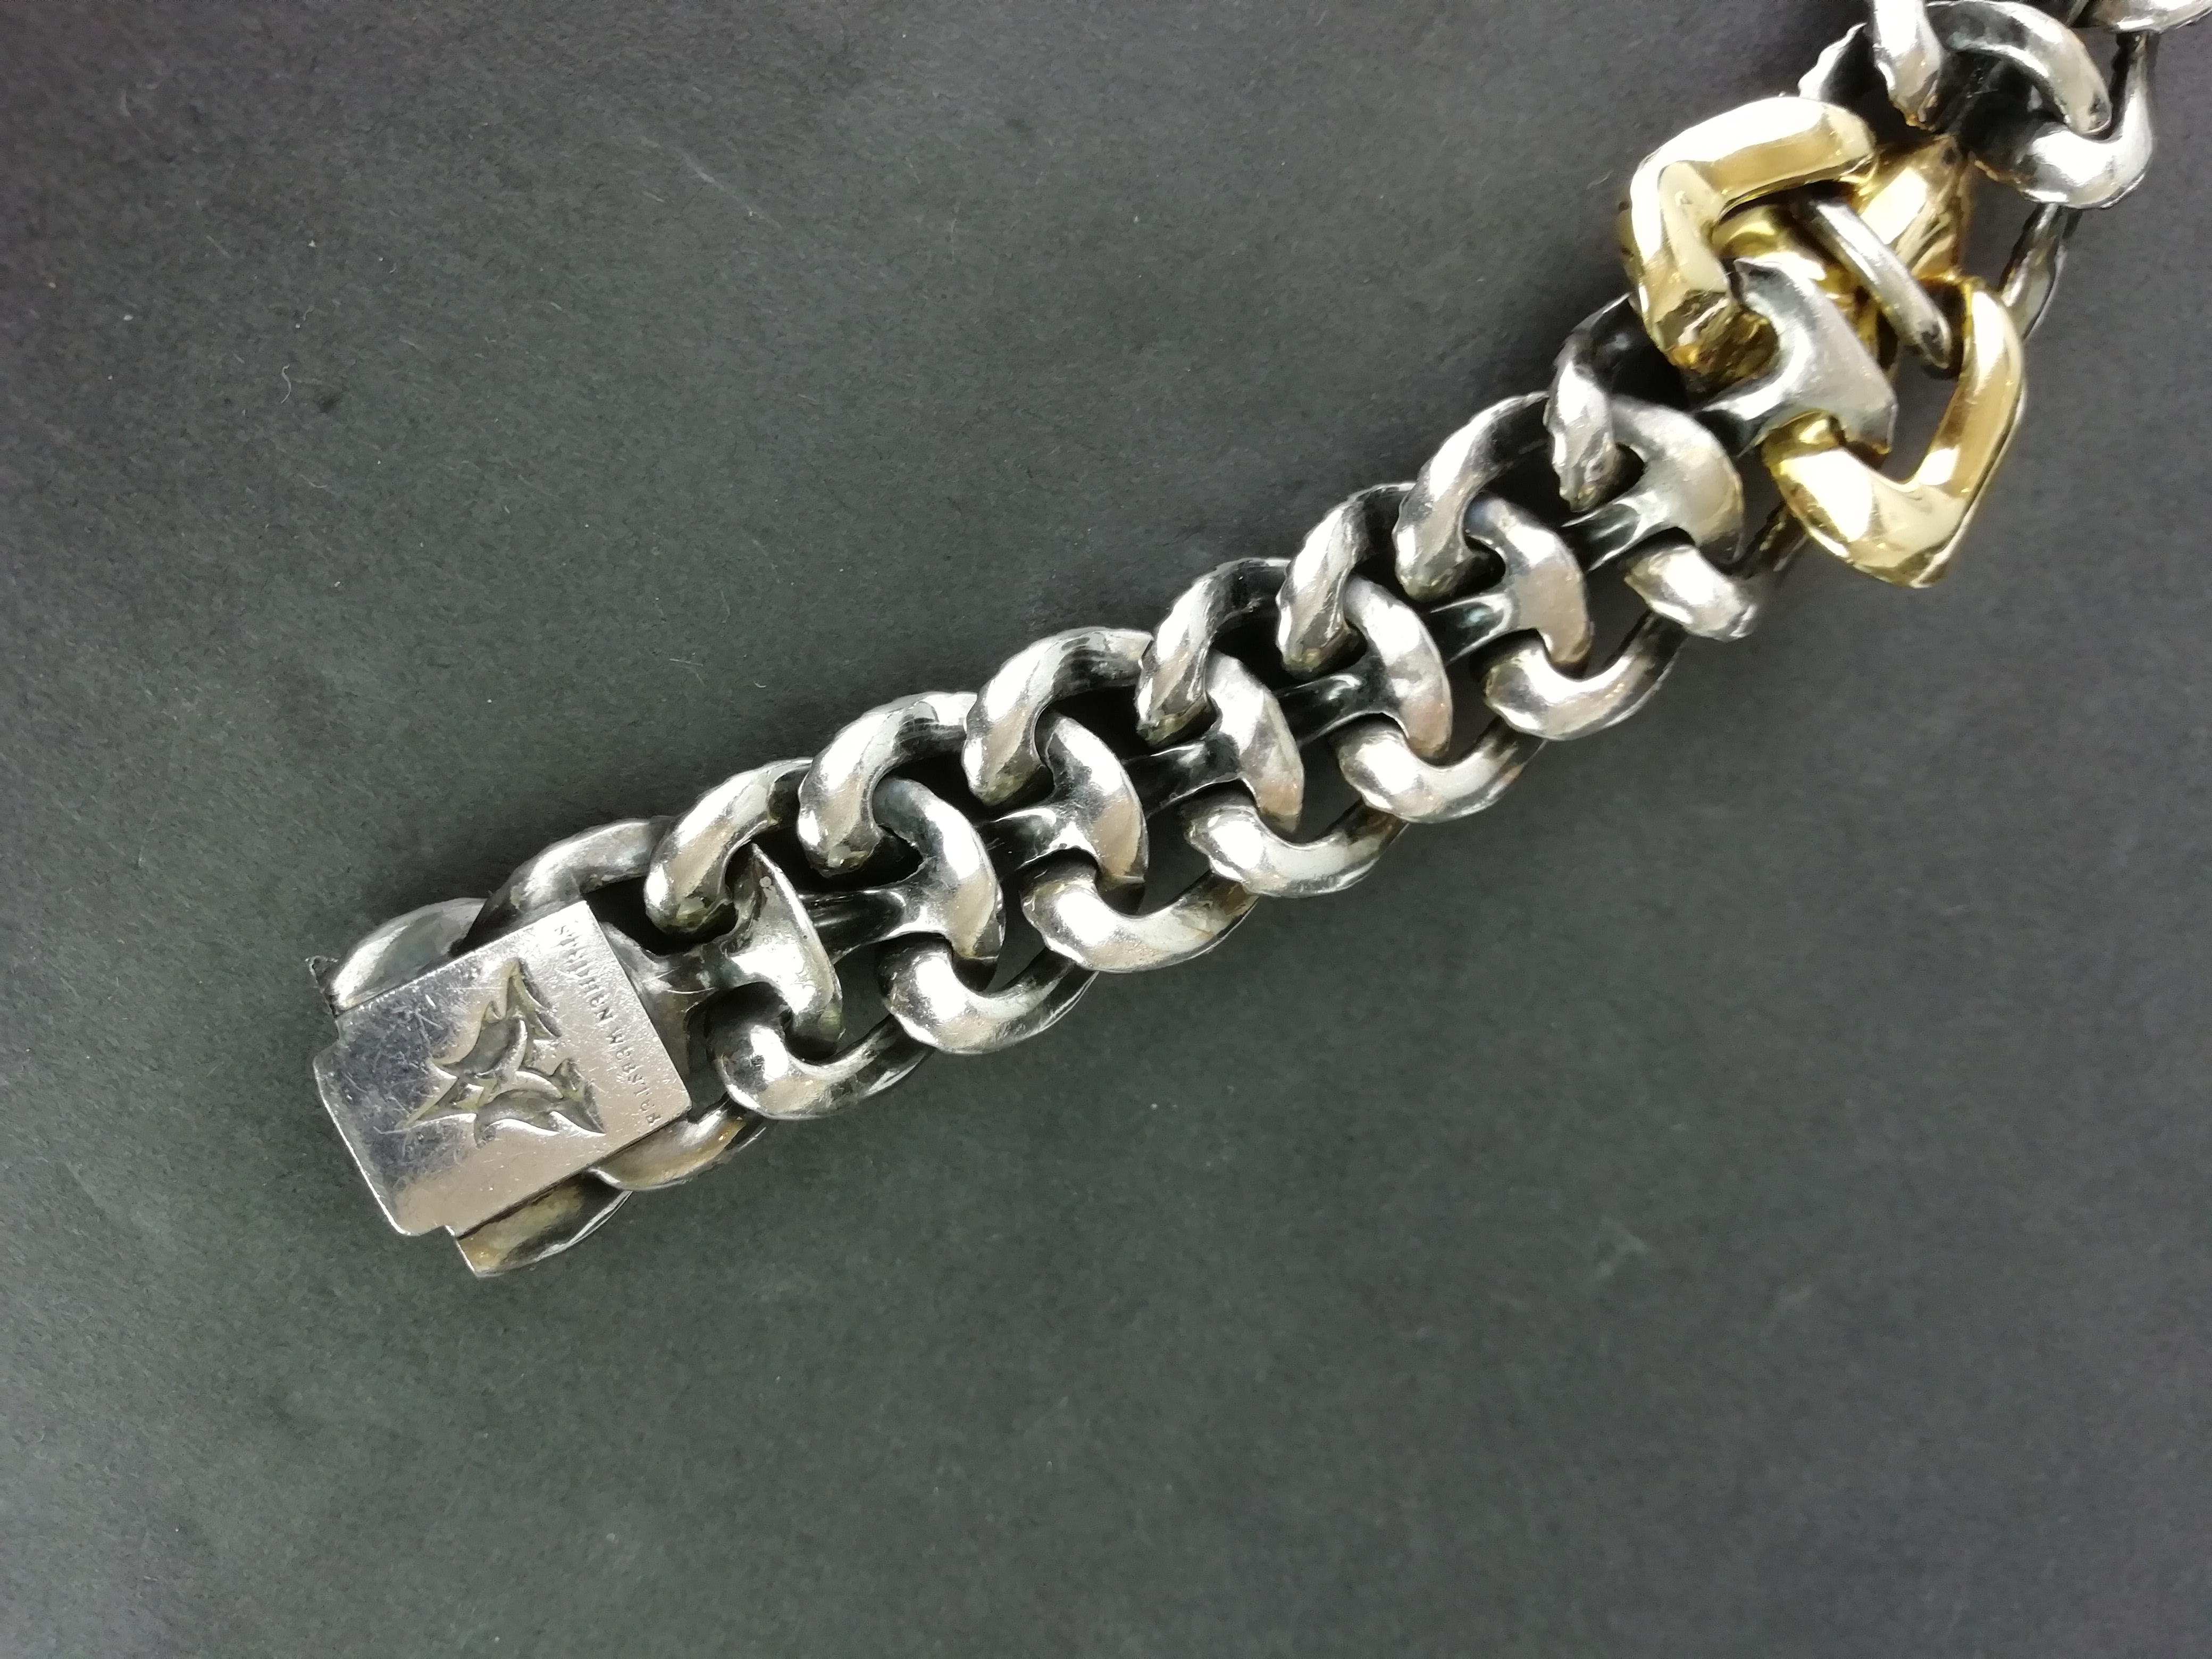 STEPHEN WEBSTER THORN COLLECTION RAMS HEAD BRACELET, 18ct yellow gold diamond set rams head, - Image 5 of 5